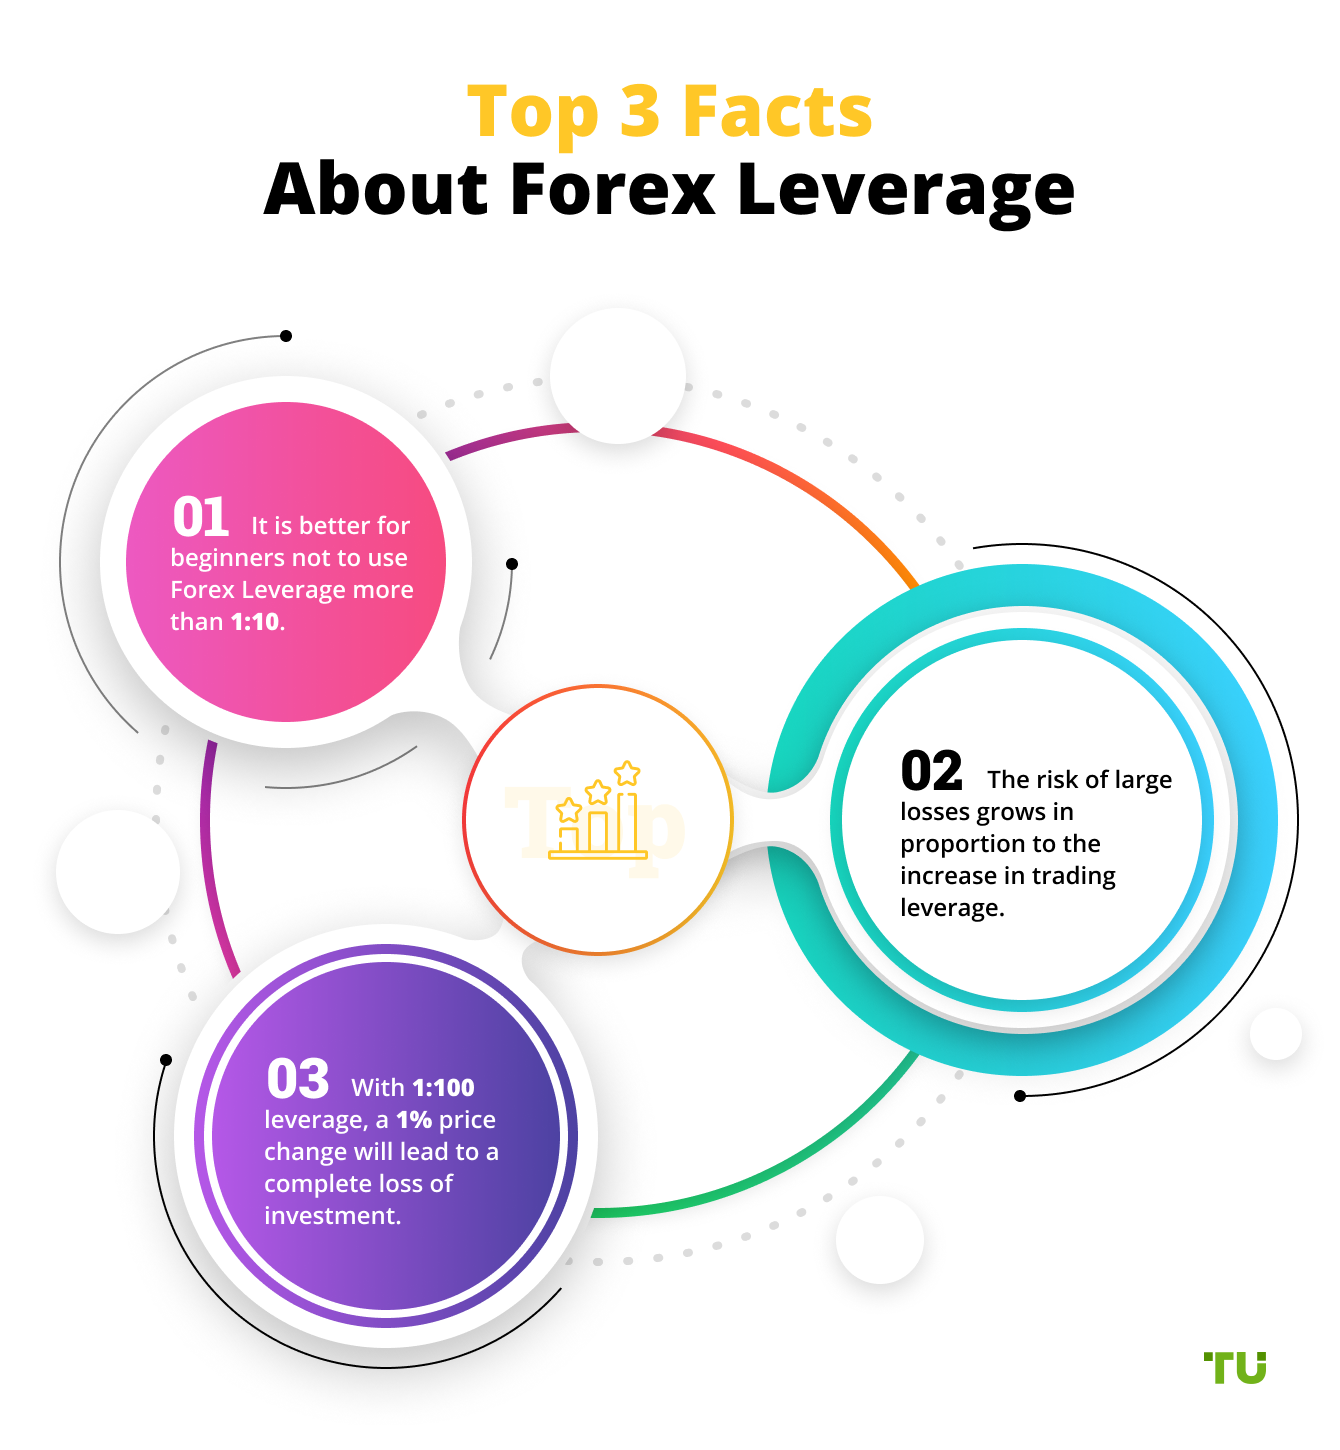 Top 3 Facts About Forex Leverage